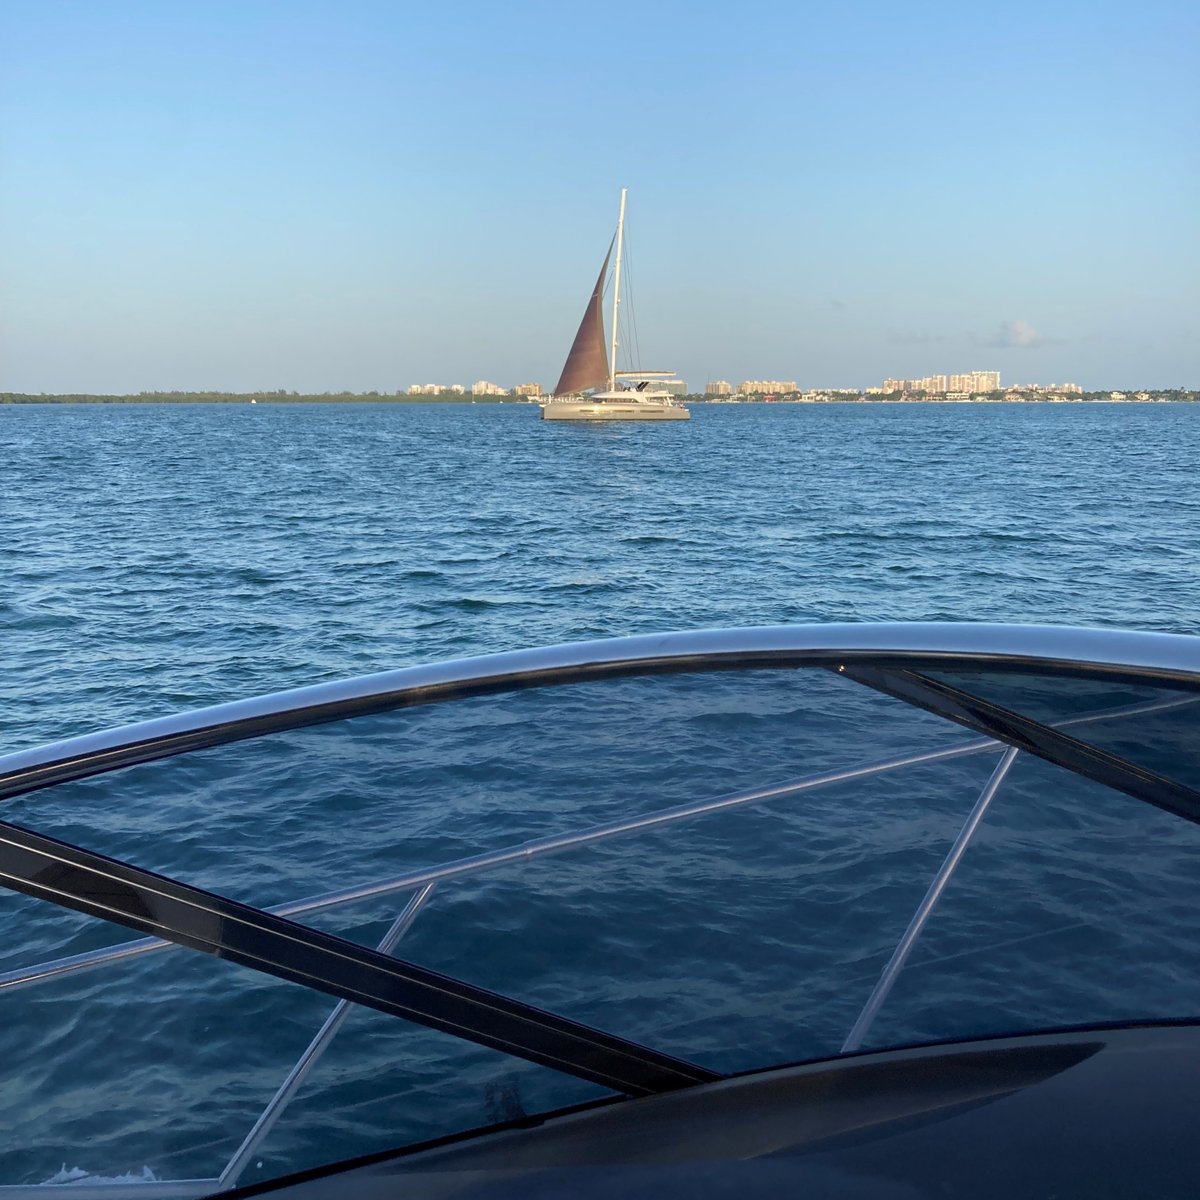 It's always good to look out your window and see a boat!
Out on the water - the place we like to be the most...
. 
#miamiyachtcharter #miamiyachtlife #emoceanboats #miamiboatrental #yachtlife #southfloridapics #miamiyachtpics #nemesis #sailboats #boatpictures